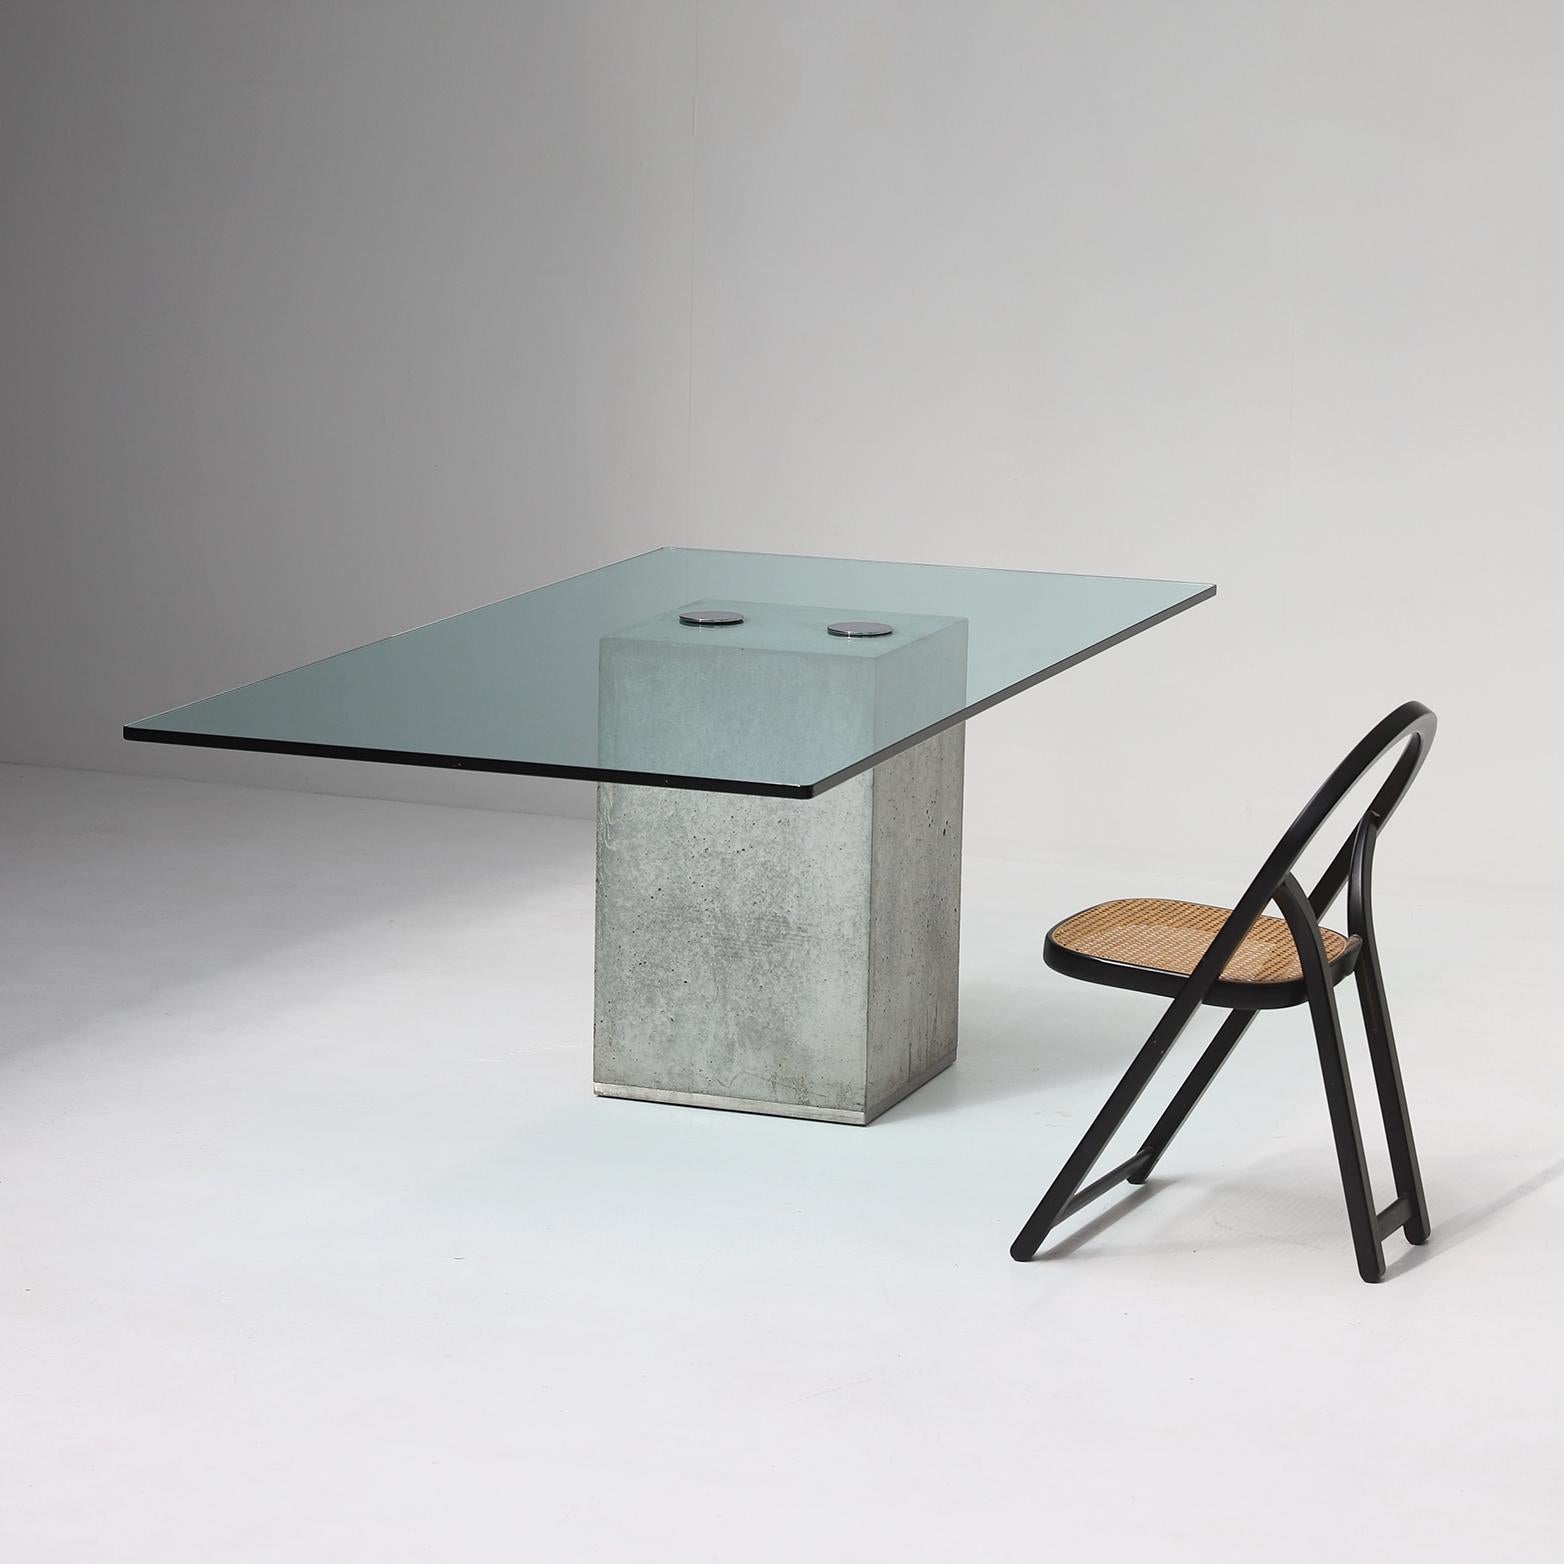 This minimalist dining table was designed and produced by Saporiti in 1972. This Sapo model comes in a coffee- and dining table and has a timeless yet inventive design. The base is made of concrete, holding a glass table top which is attached with